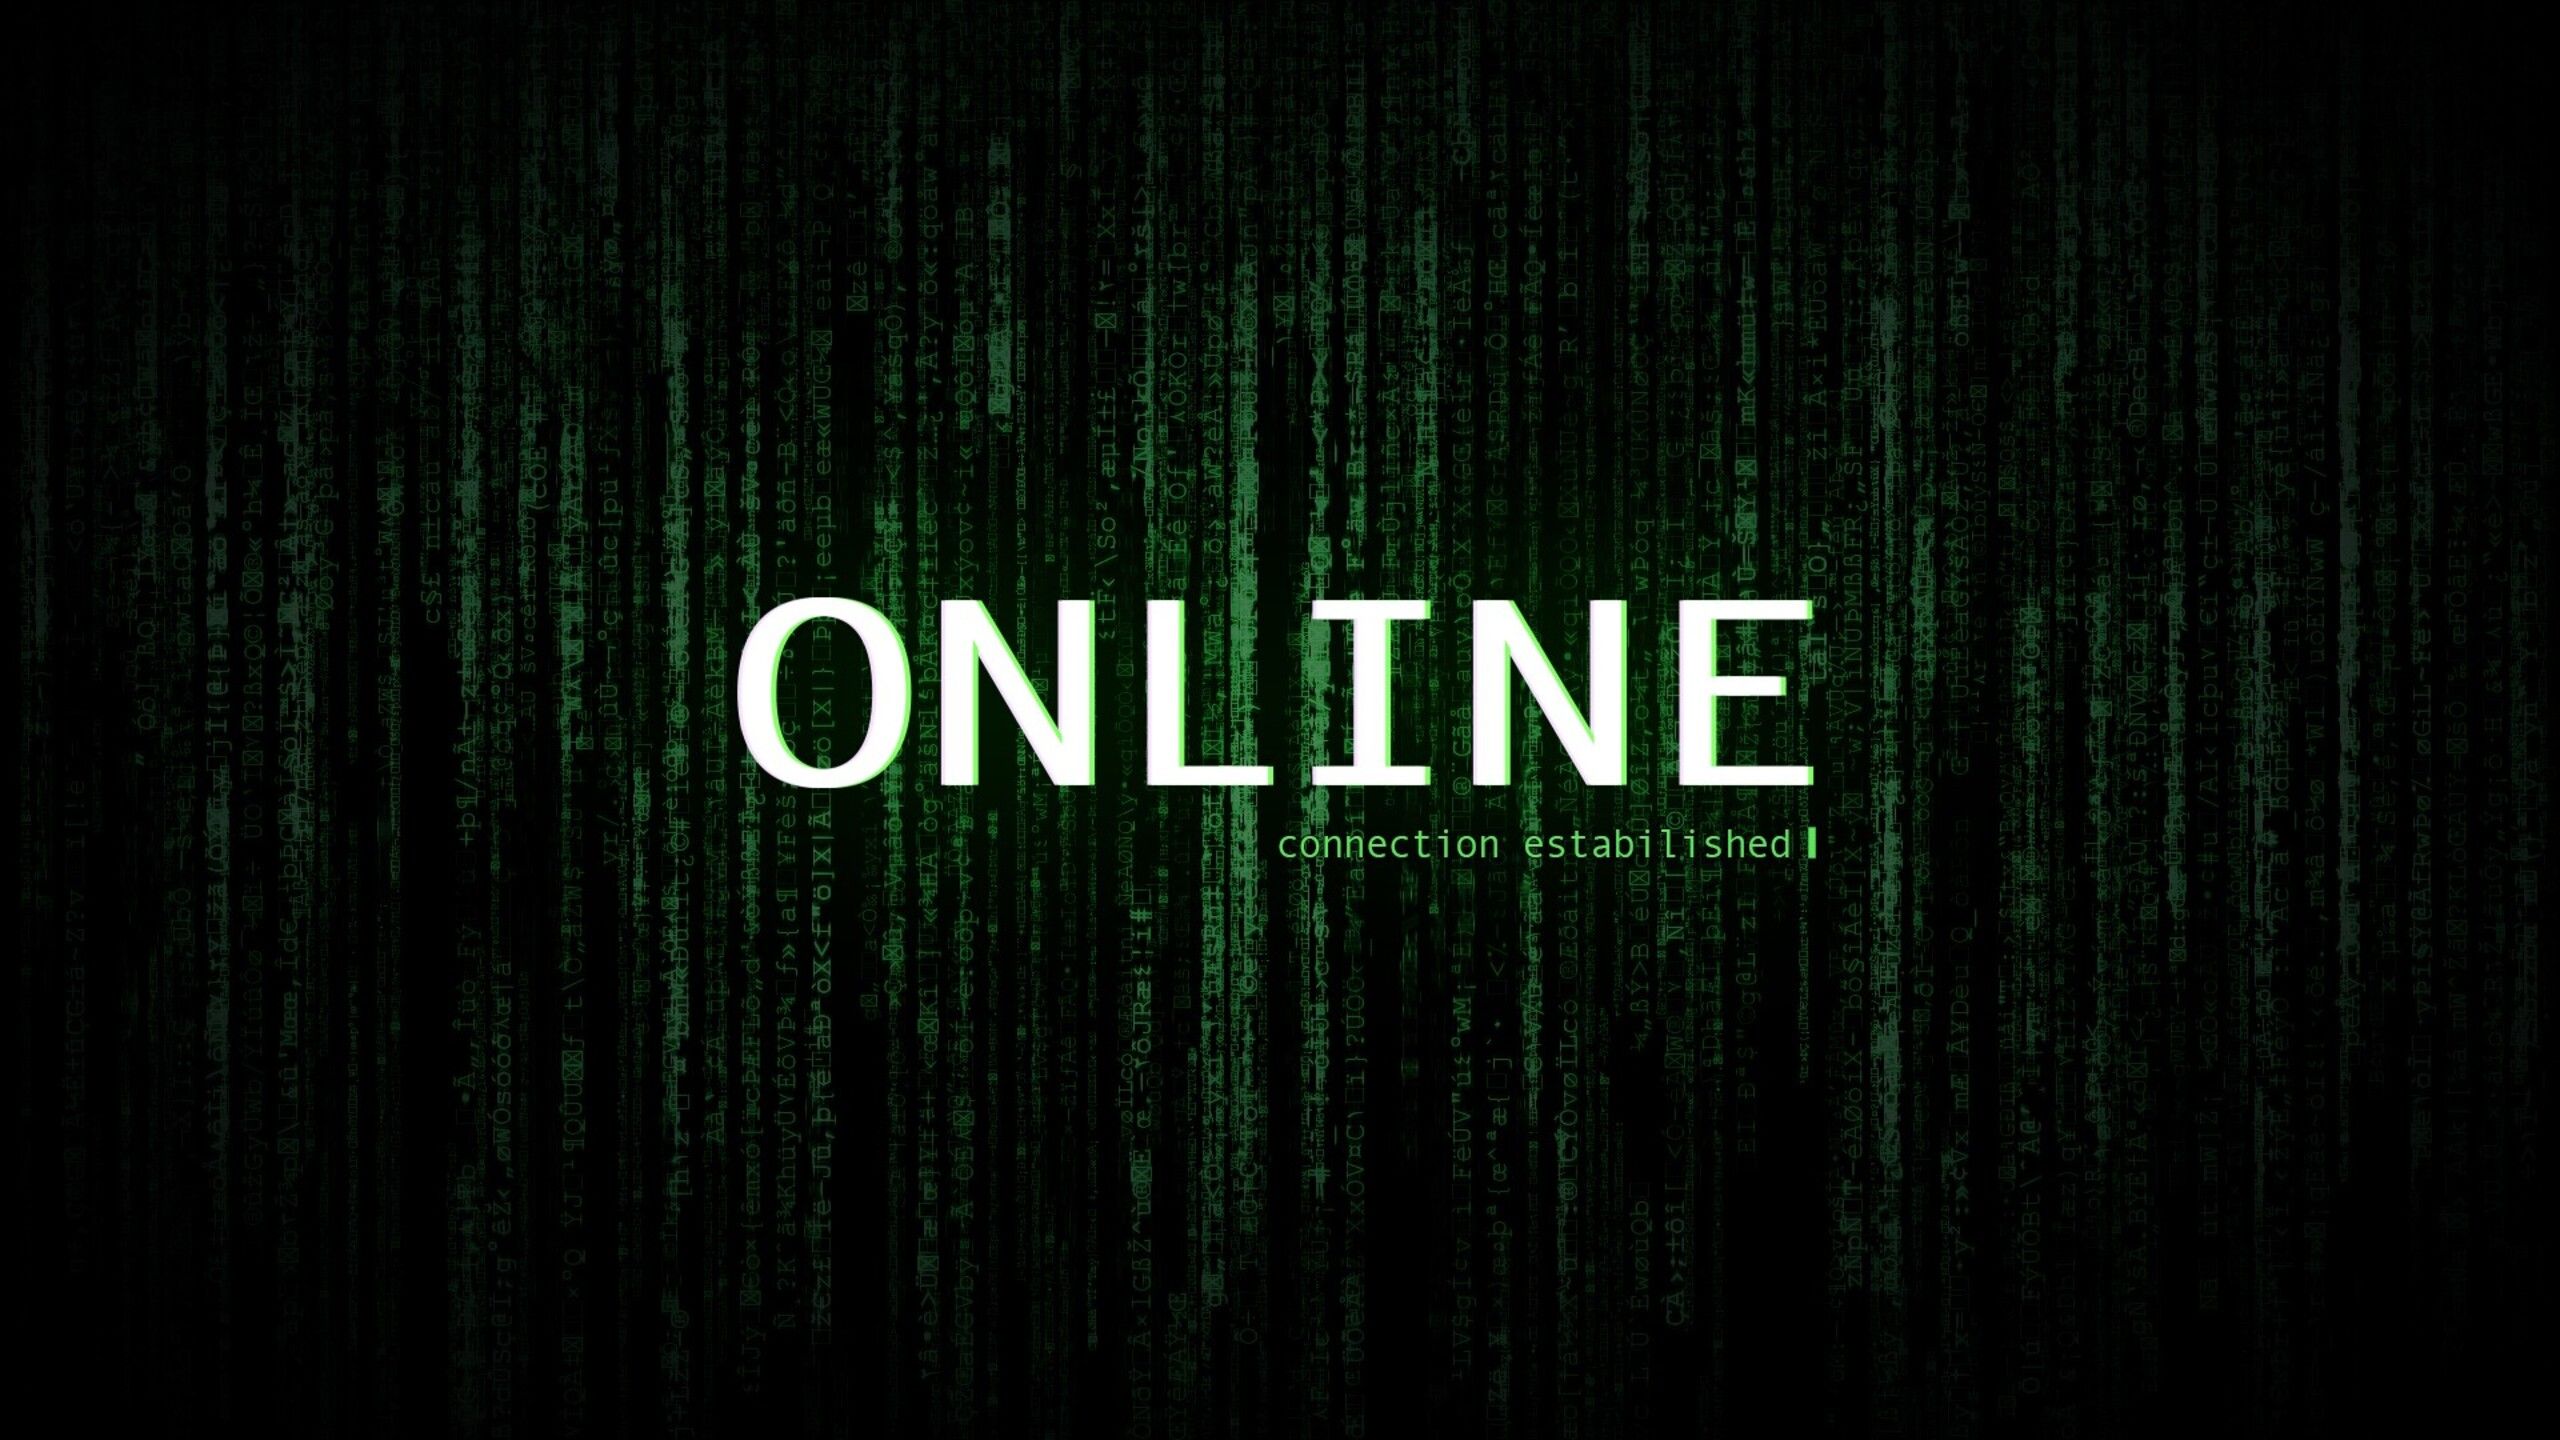 Online Matrix 1440P Resolution HD 4k Wallpaper, Image, Background, Photo and Picture